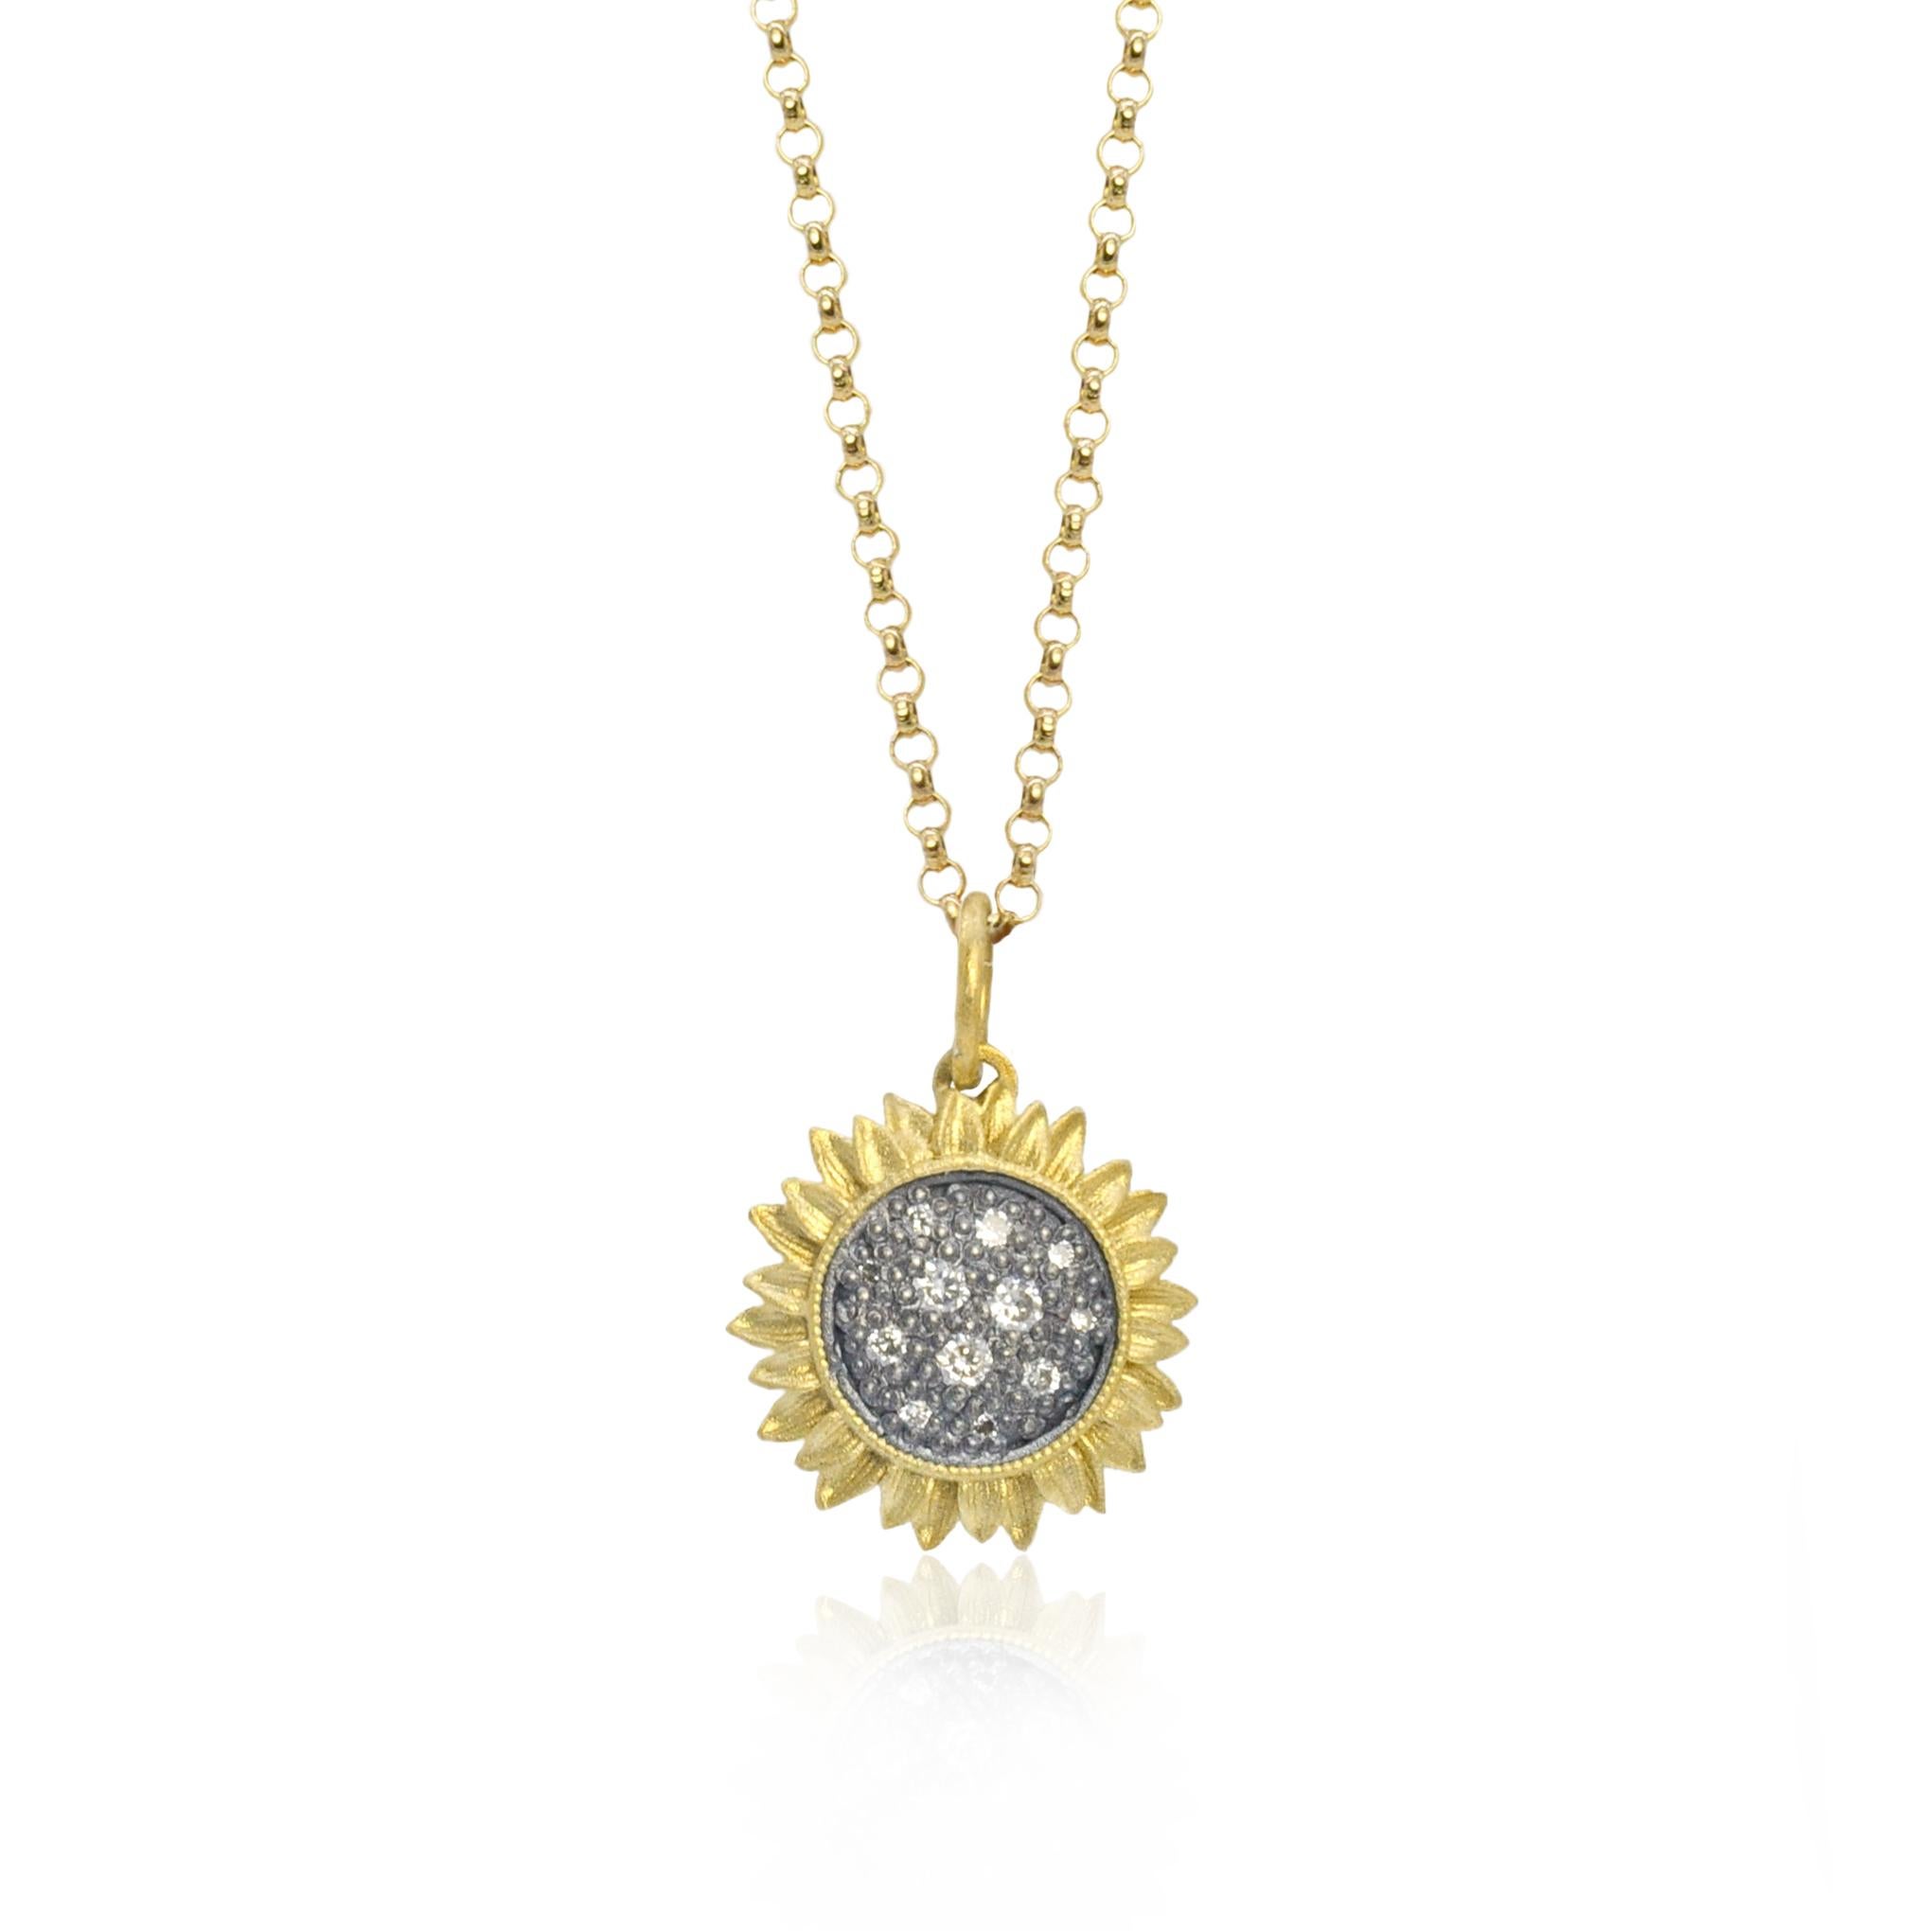 Brilliant Cut Sunflower Necklace with Pave Set Diamonds in Oxidized Silver, Tiny For Sale